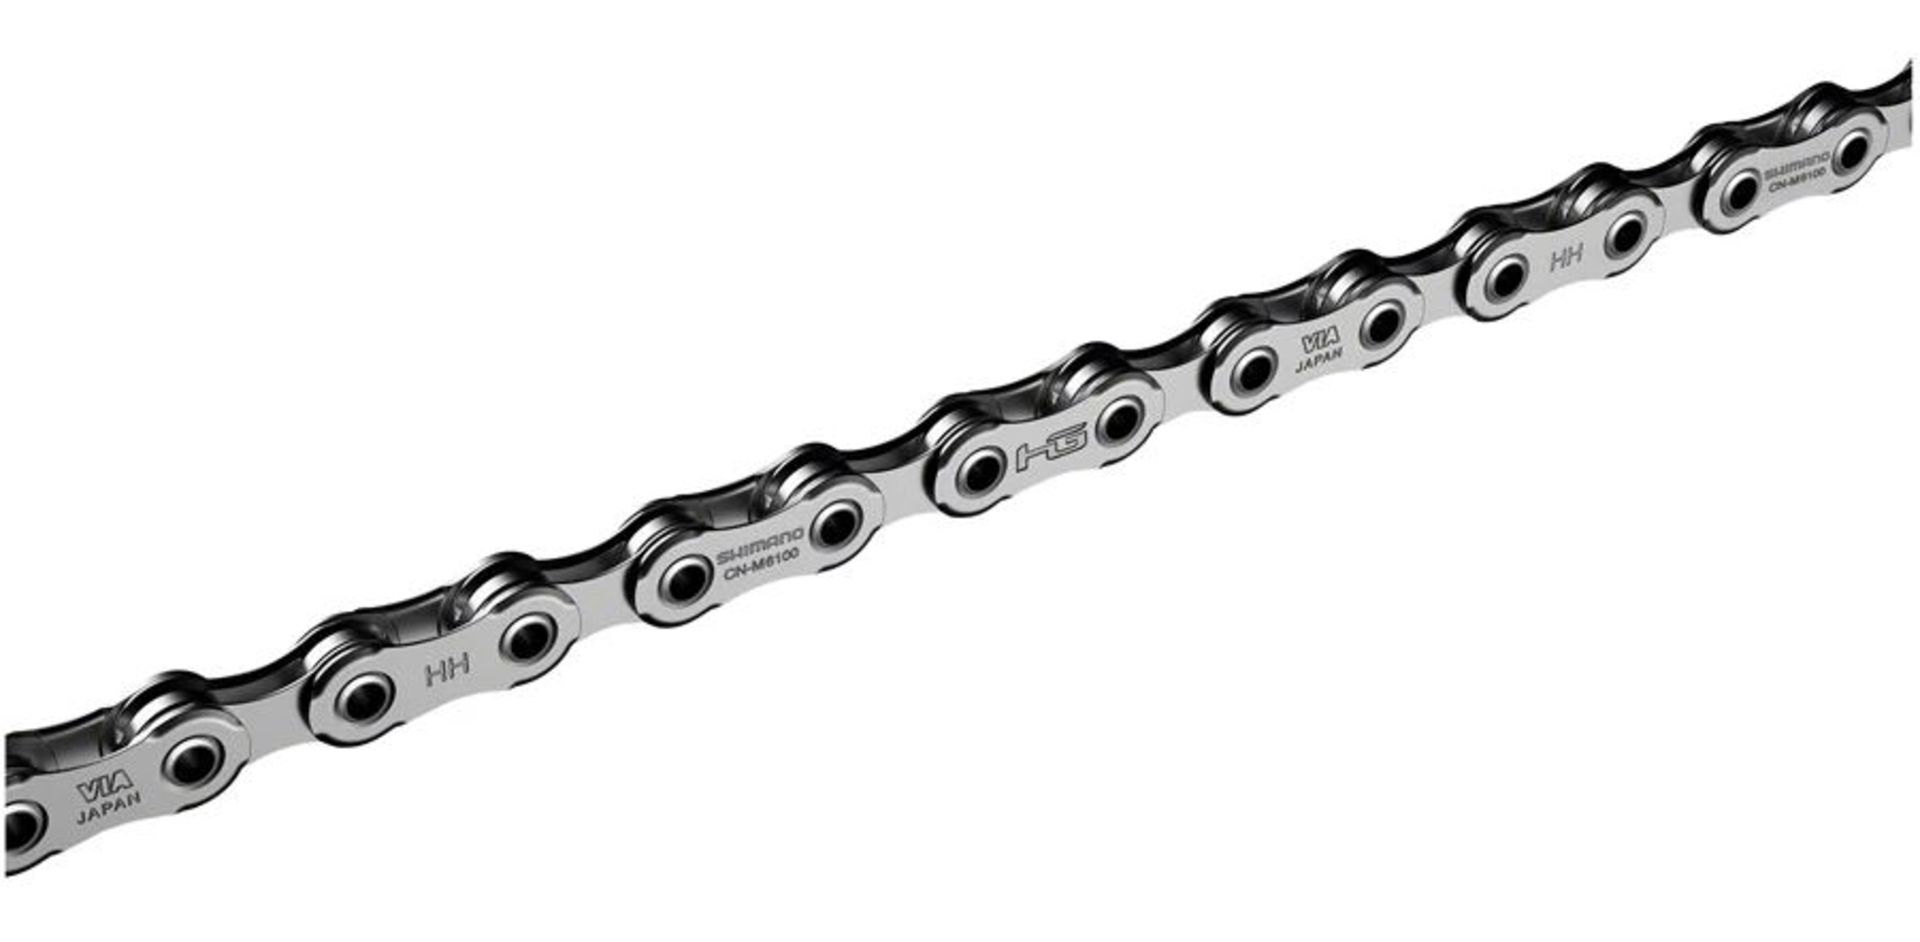 4 x shimano Deore CN-M6100 Chains - 12-Speed, 126 Links - Image 2 of 4